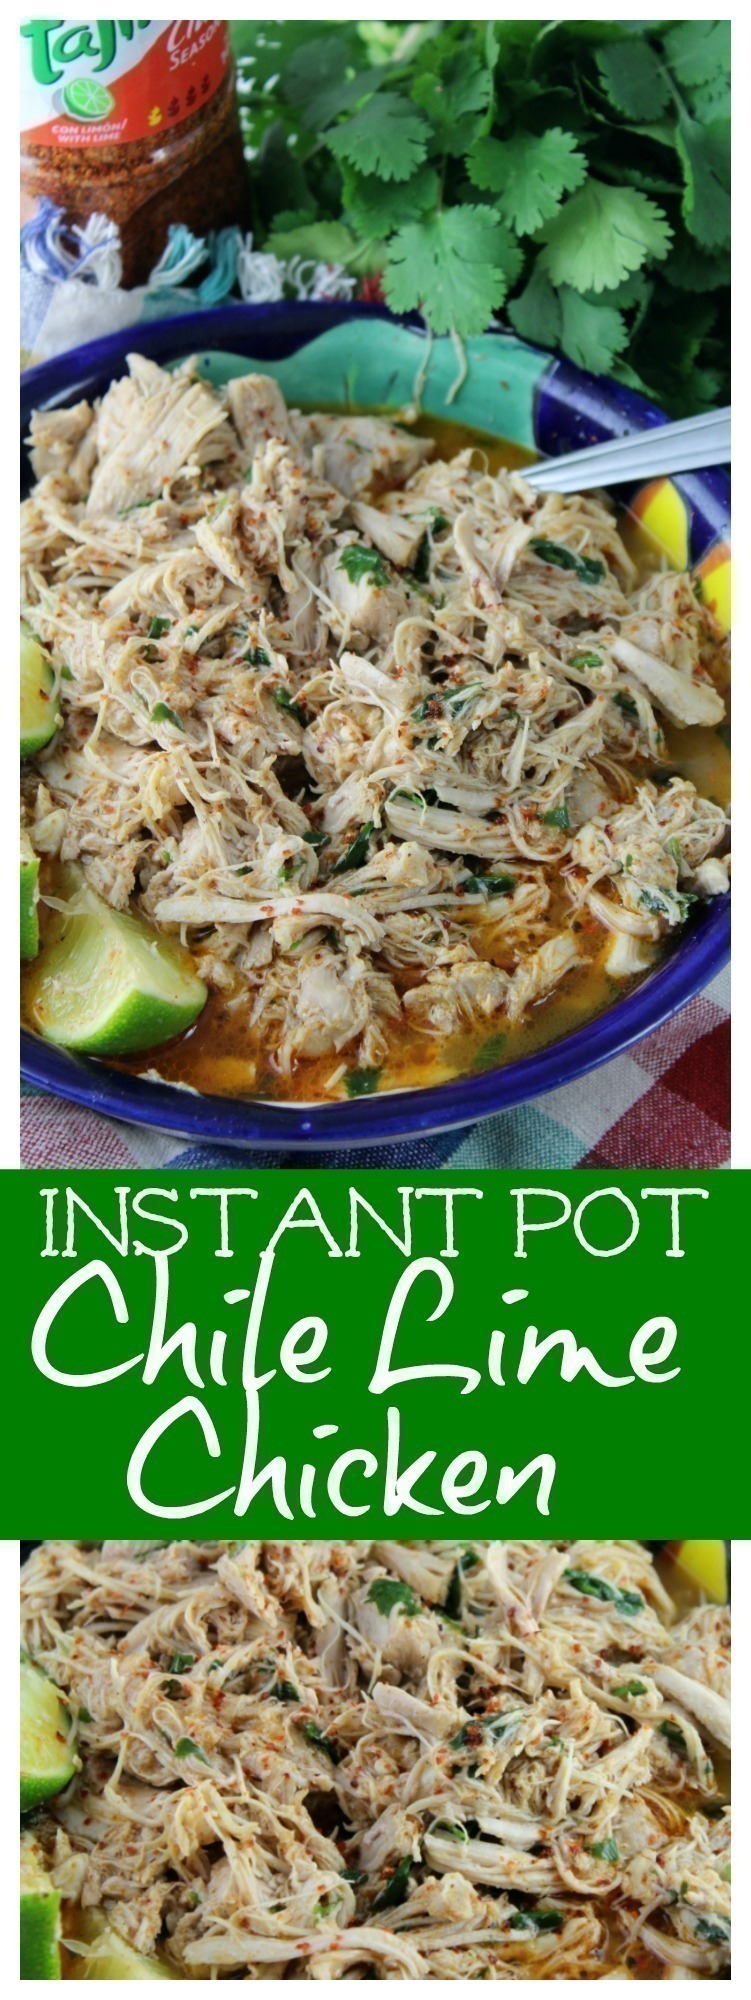 Shredded chicken marries with fresh lime and chile, and bathe in a sea of spices to create a flavorful filling for tacos, burritos and more.